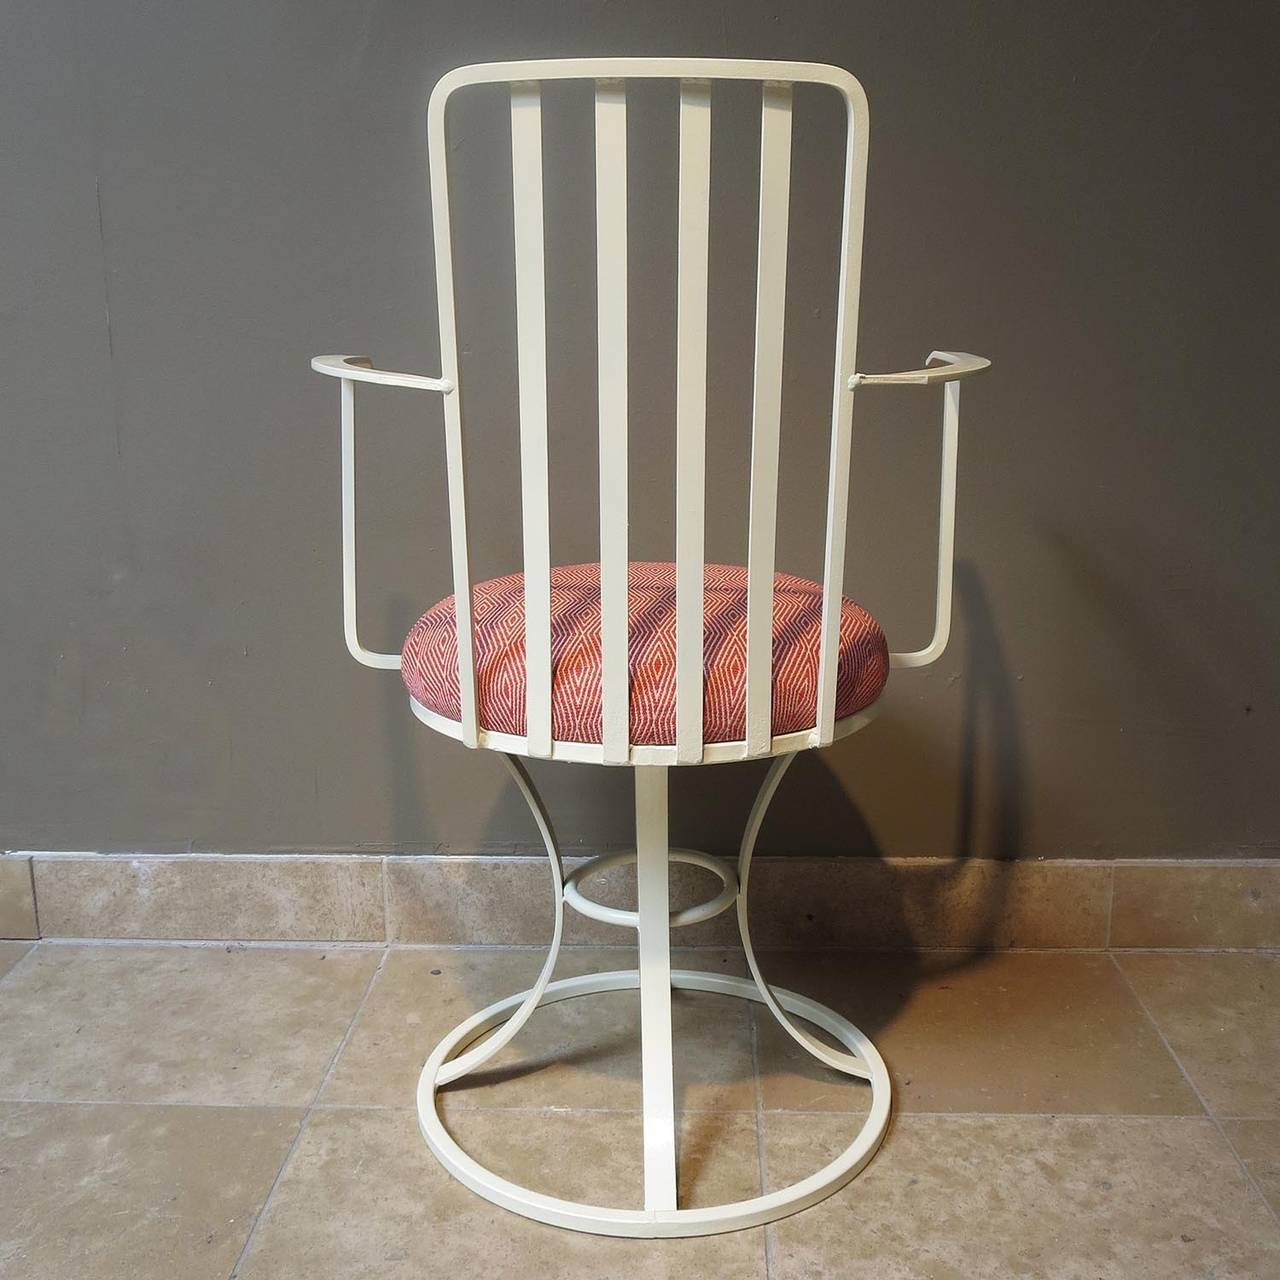 American Mid-Century Set of Four Painted Iron Patio Chairs